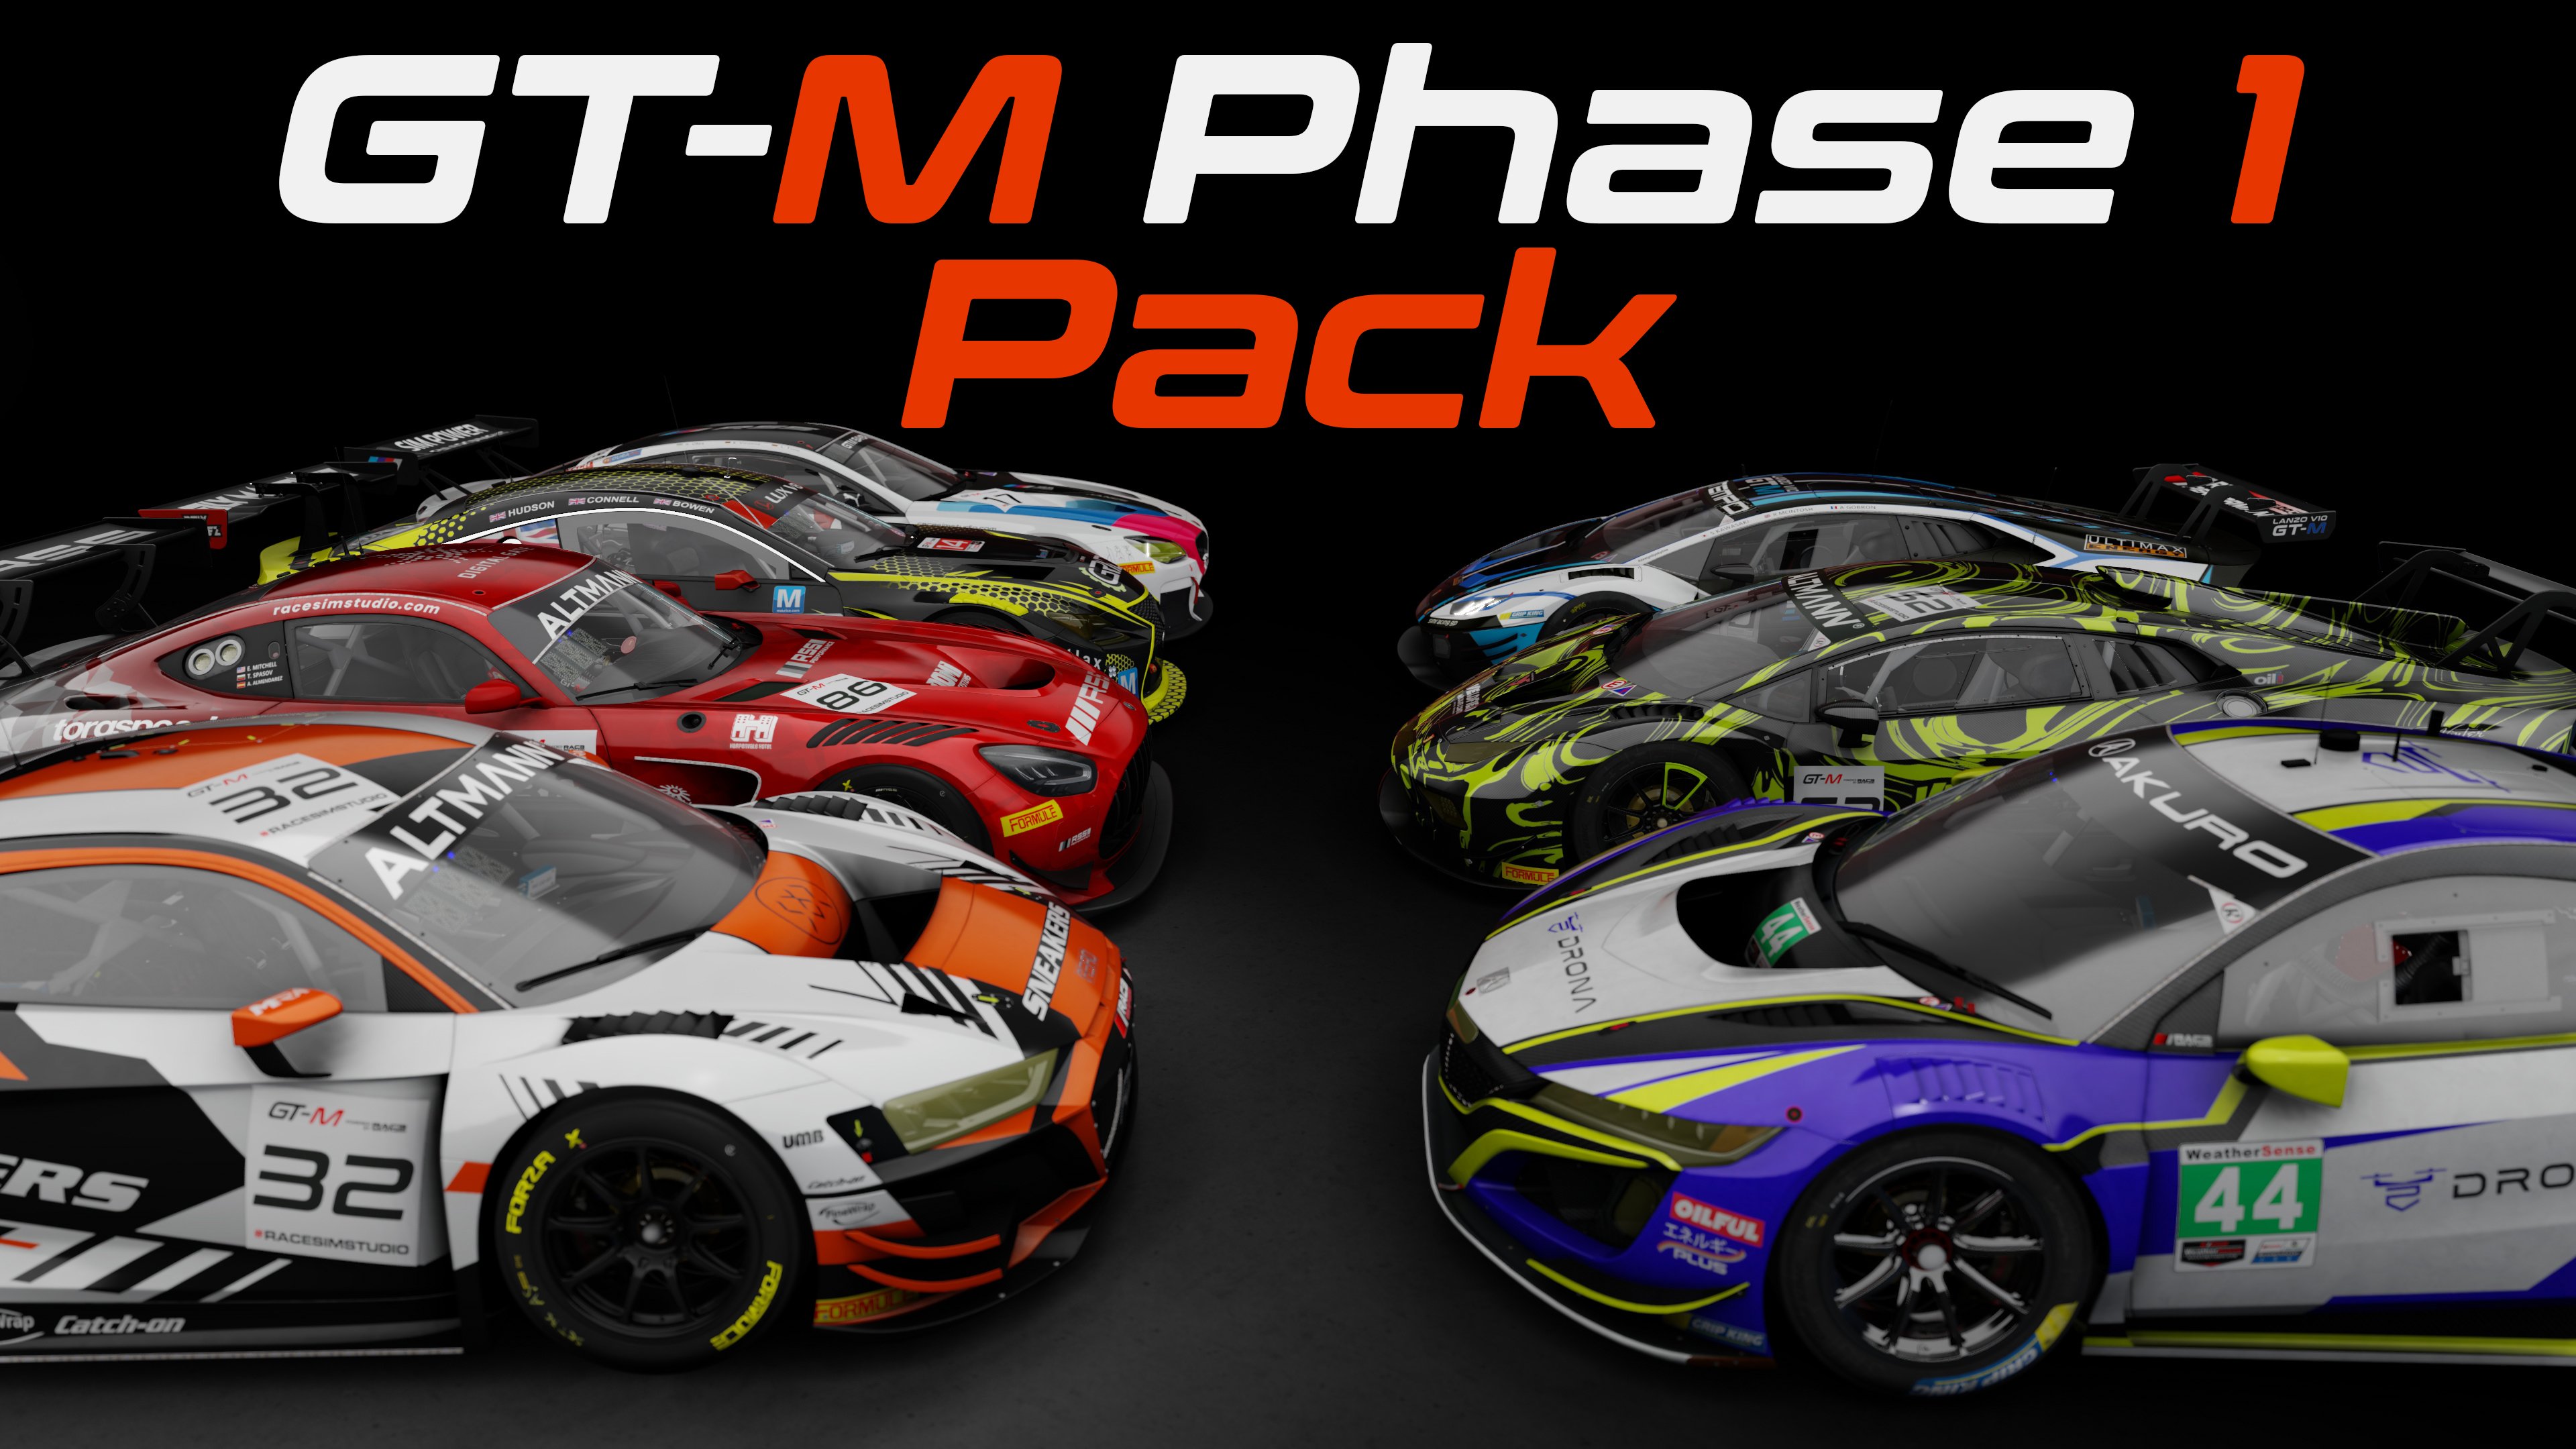 More information about "Assetto Corsa: GT-M Championship Phase 1 – Pack aggiornato by Race Sim Studio"